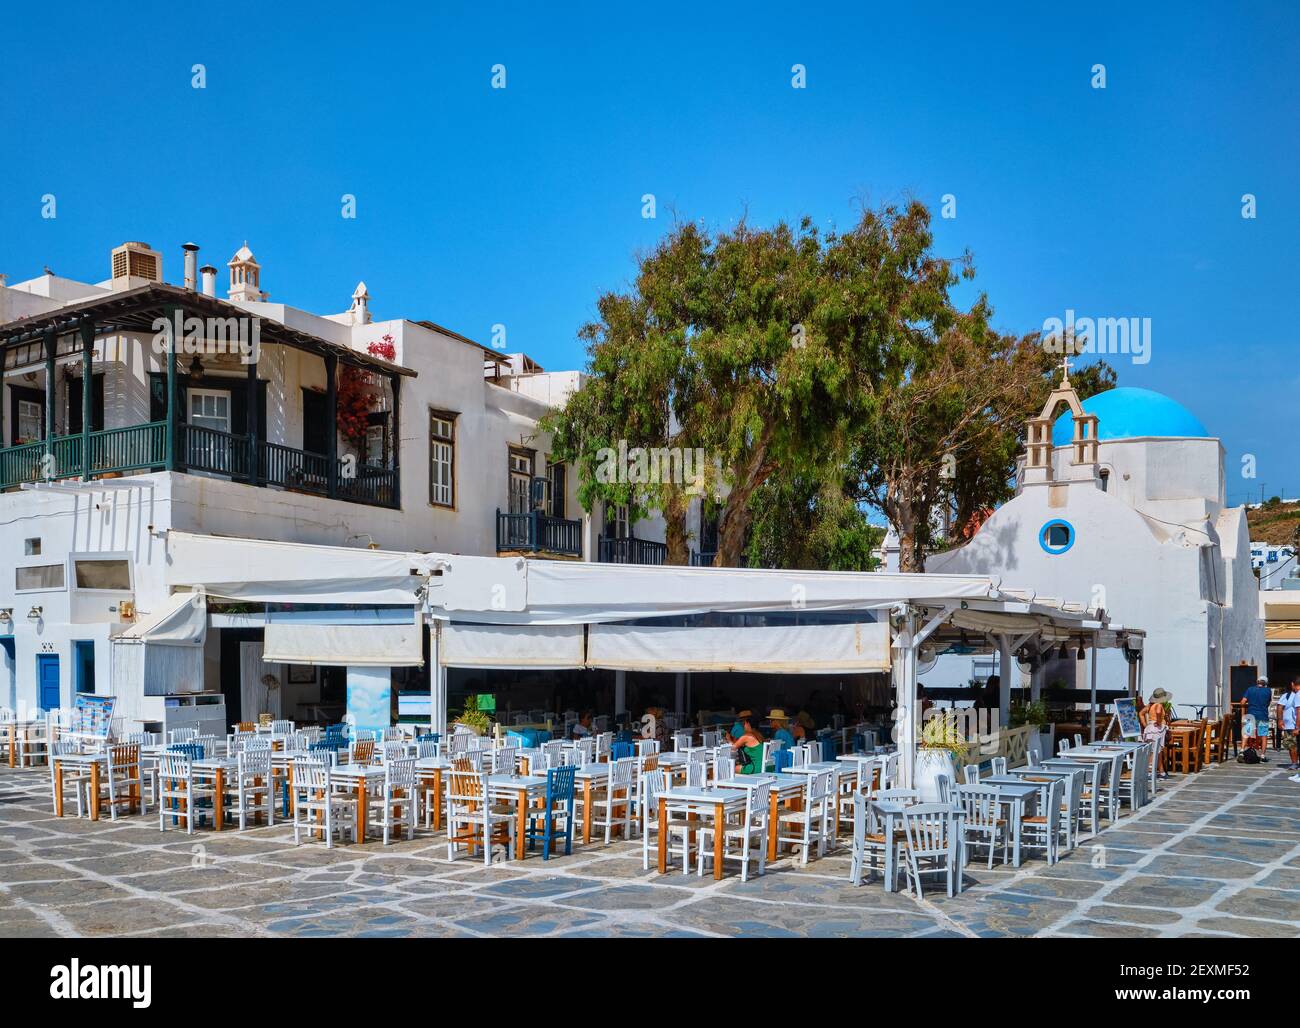 Colorful outdoor cafe or restaurant in typical Greek island town. Greek Orthodox church, blue dome, tourists roam around. Mykonos, Cyclades, Greece. Stock Photo